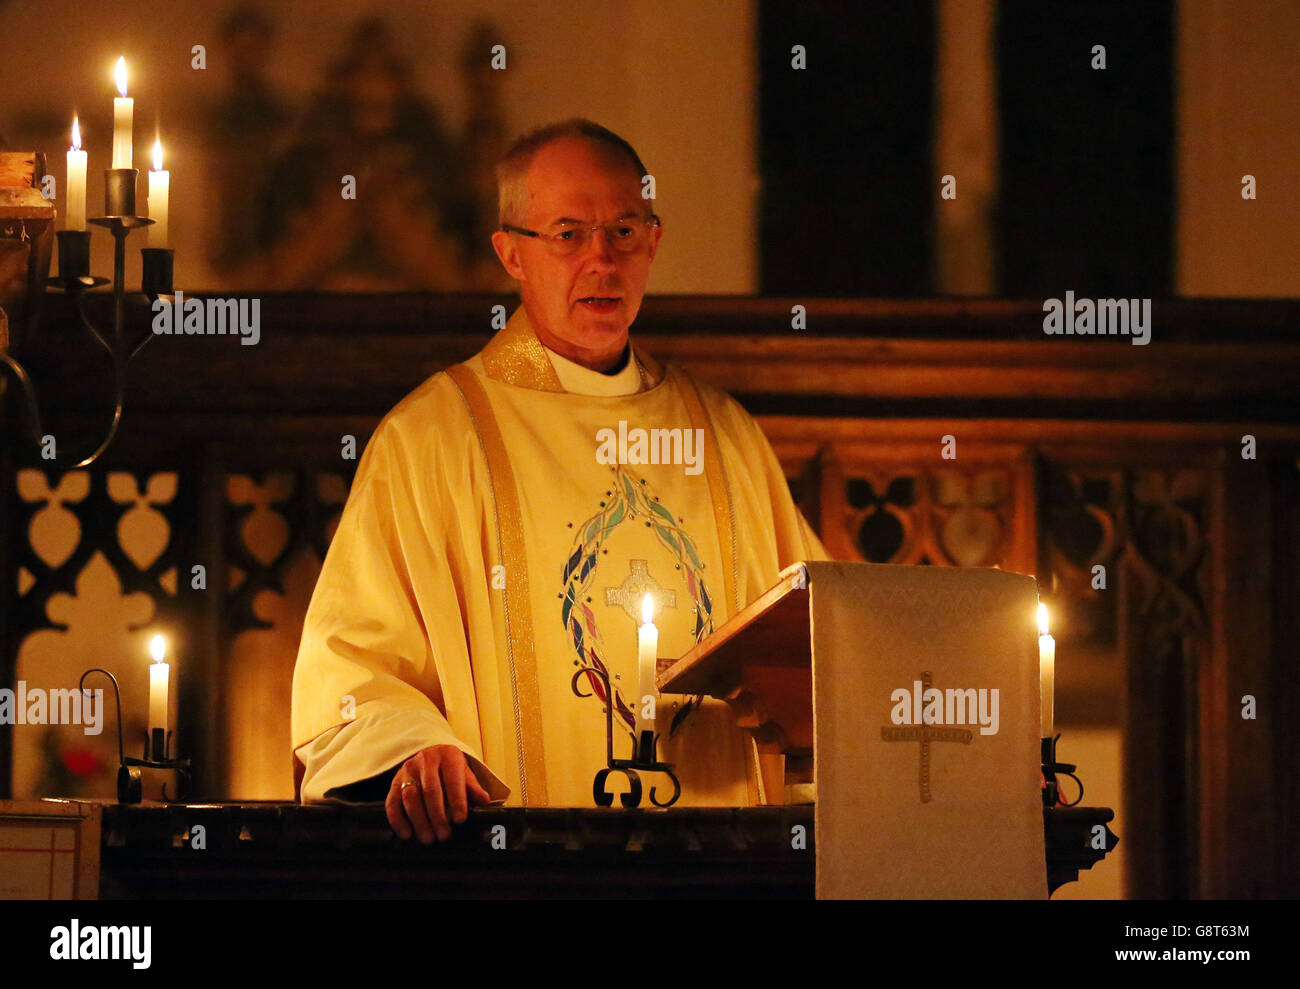 The Archbishop of Canterbury, the Most Rev Justin Welby, ldelivers his sermon during the Easter Eve service at St. Thomas the Apostle Church in Harty, Kent. Stock Photo